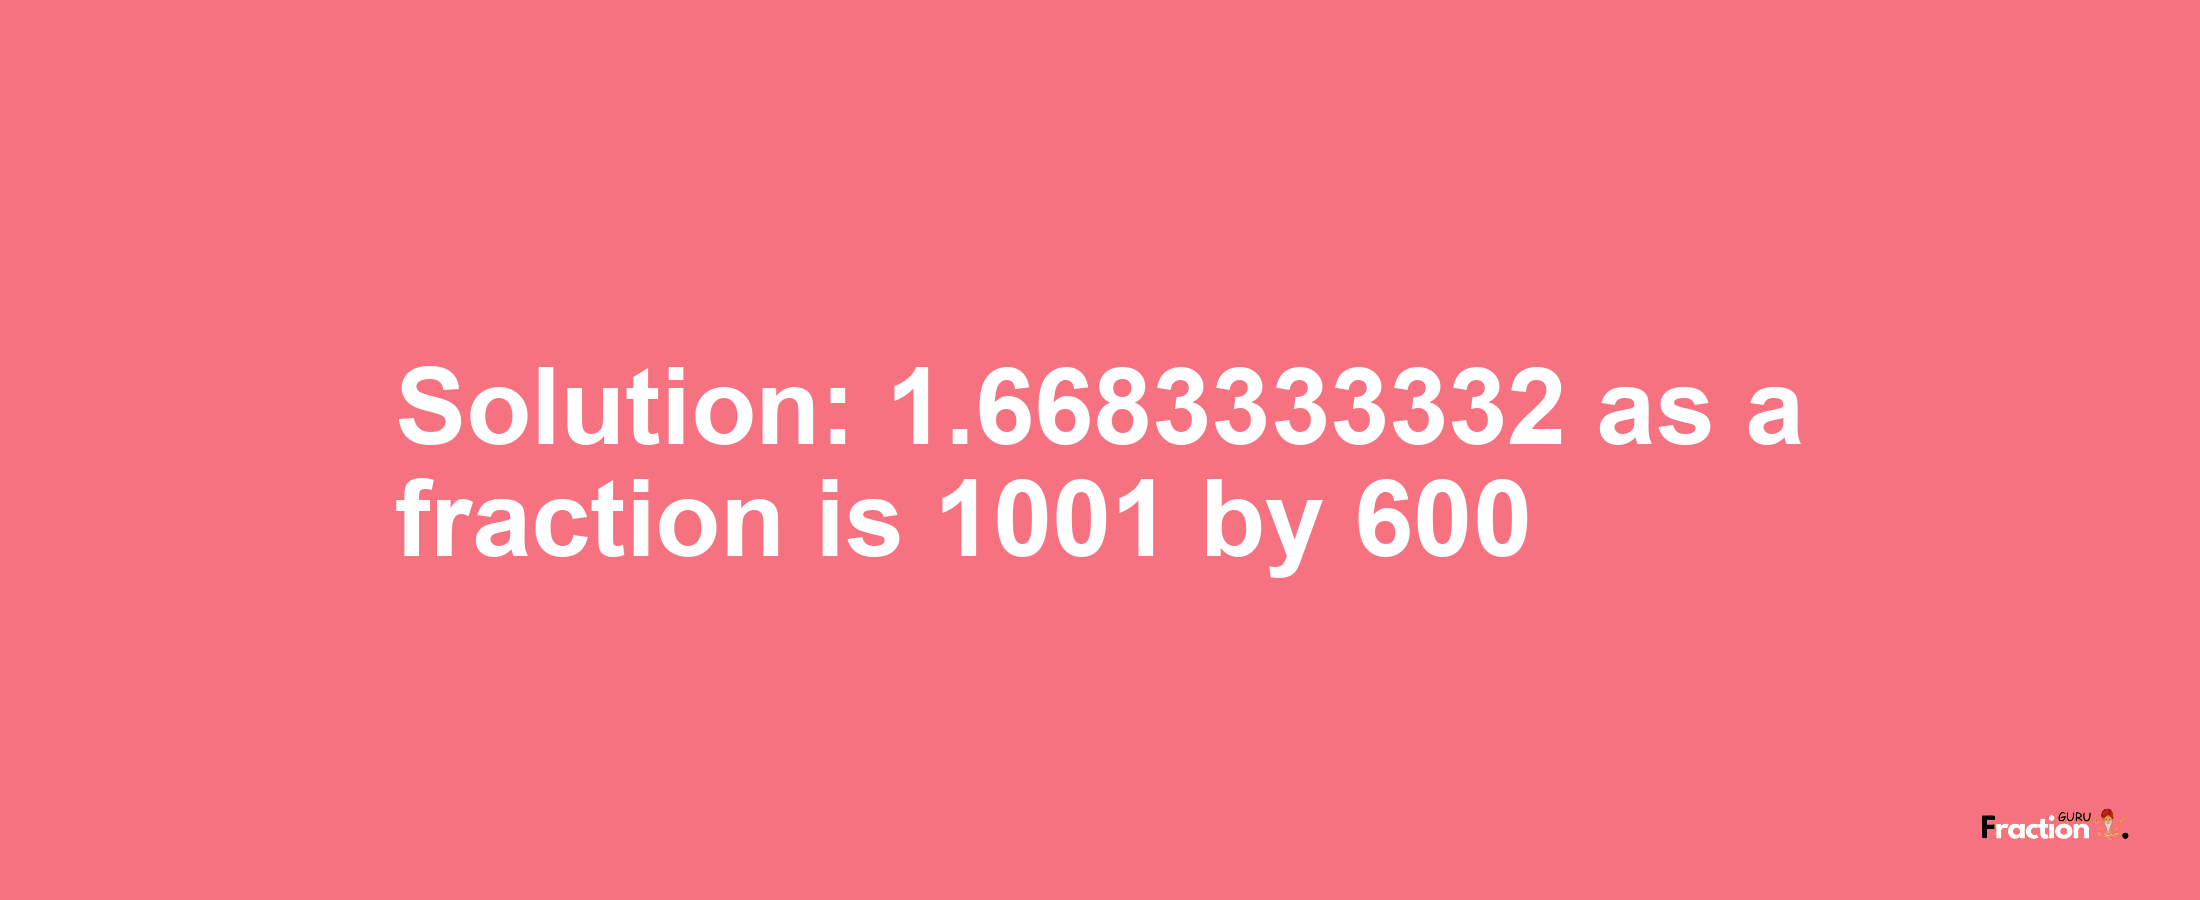 Solution:1.6683333332 as a fraction is 1001/600